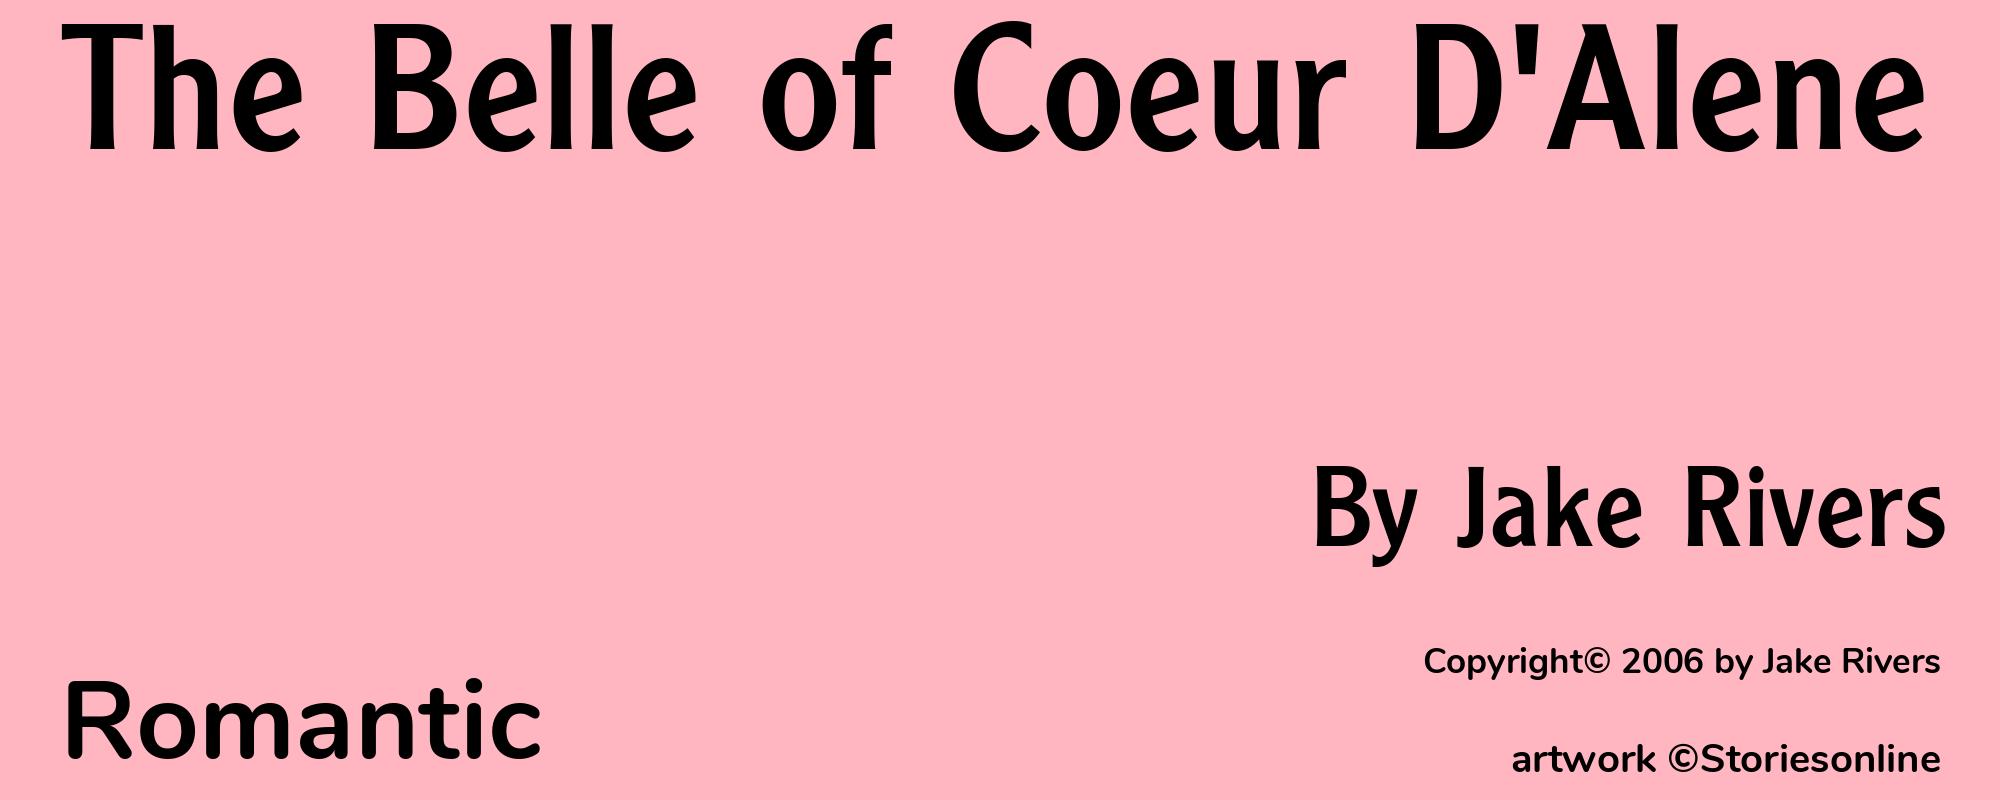 The Belle of Coeur D'Alene - Cover